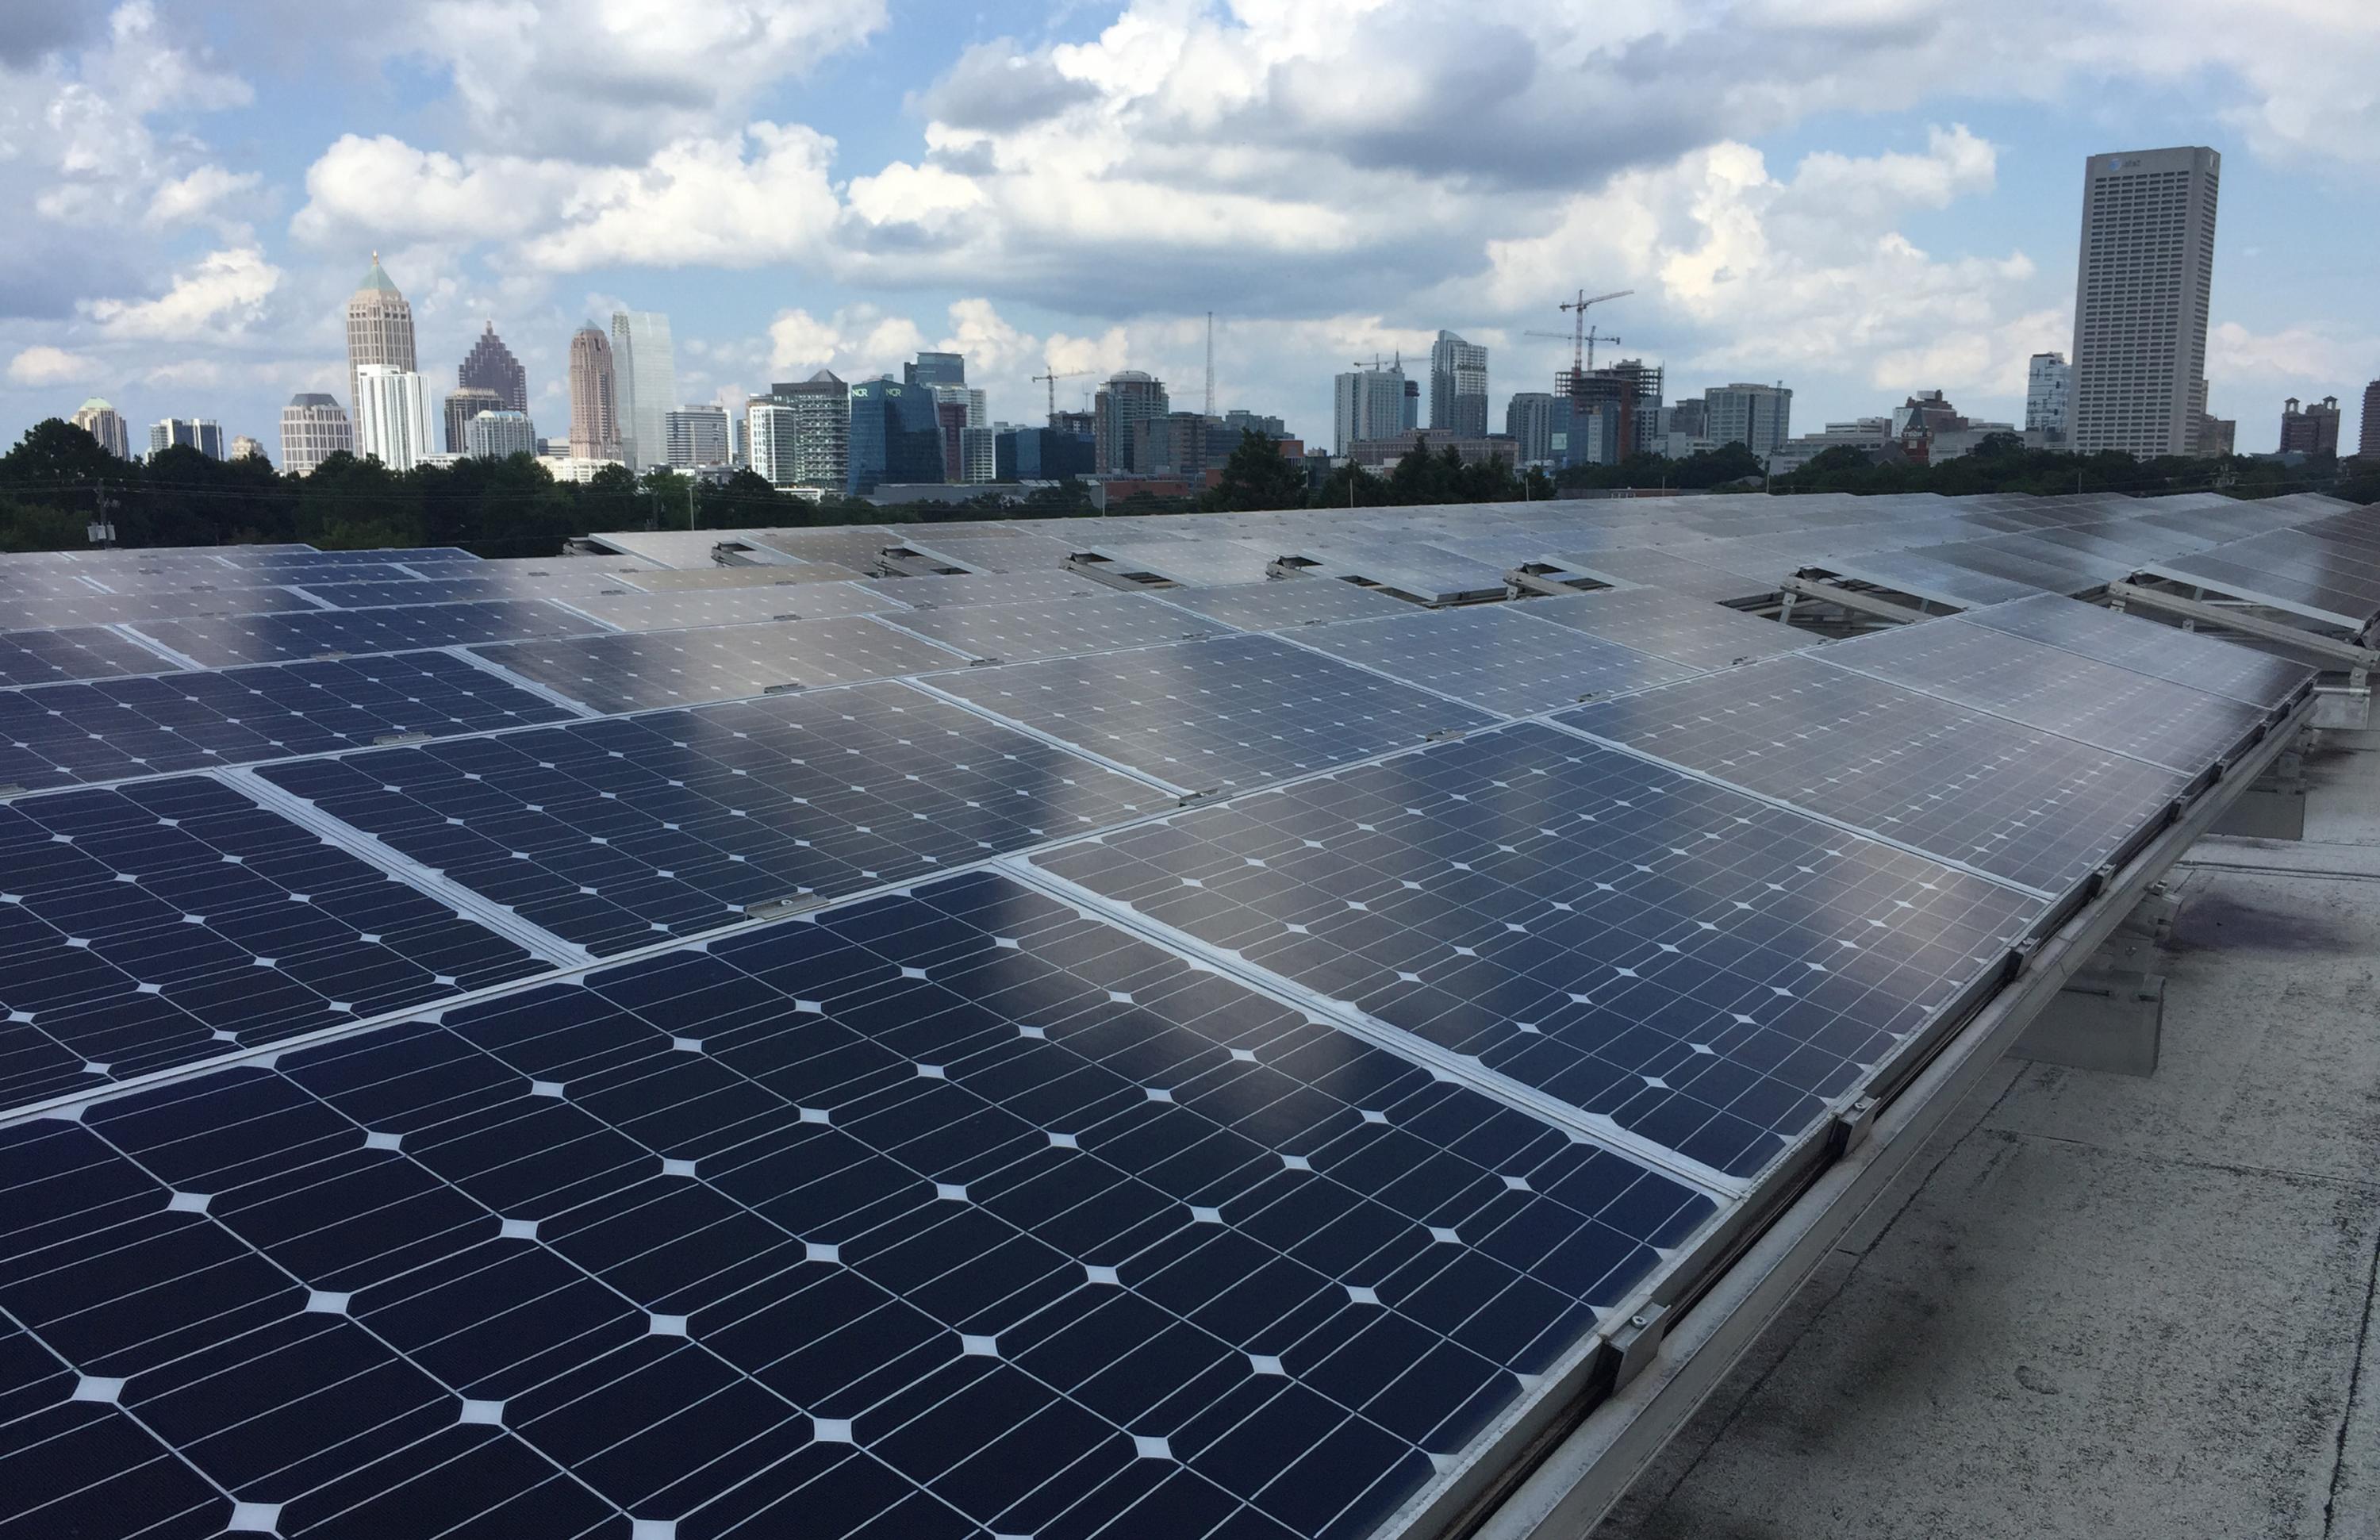 Rows of photovoltaic panels are shown atop a building on the Georgia Institute of Technology campus in Atlanta. A new technique under development could potentially improve the efficiency of solar cells. (Credit: John Toon, Georgia Tech)